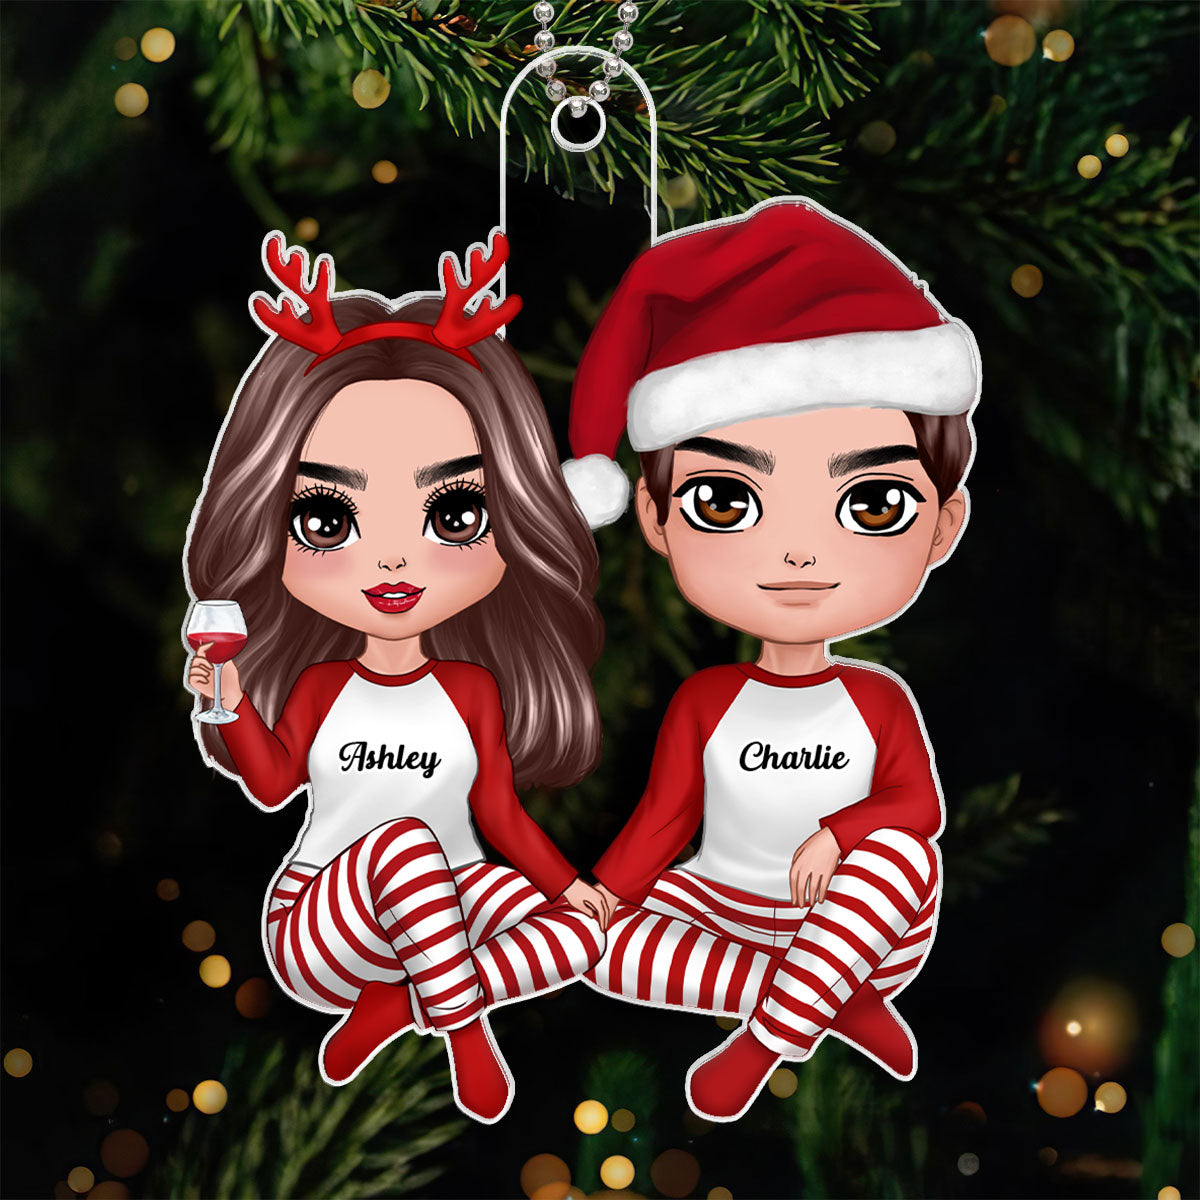 Pajamas Doll Couple Sitting Christmas Gift For Him For Her Personalized Acrylic Ornament